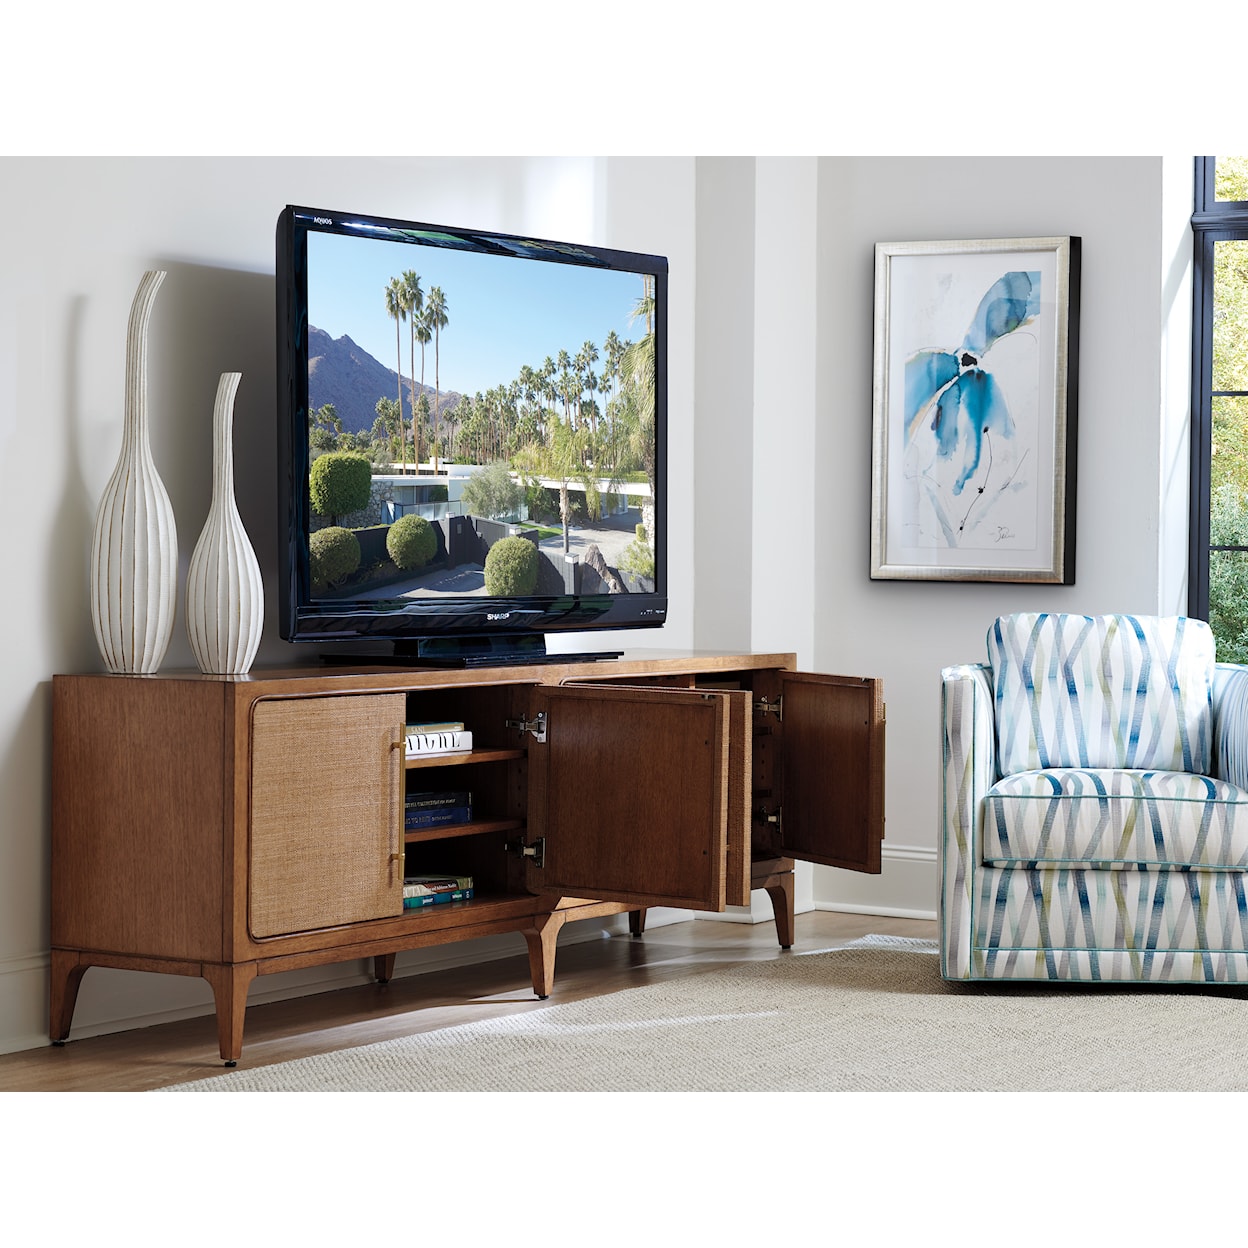 Tommy Bahama Home Palm Desert Sierra Madre Media Console